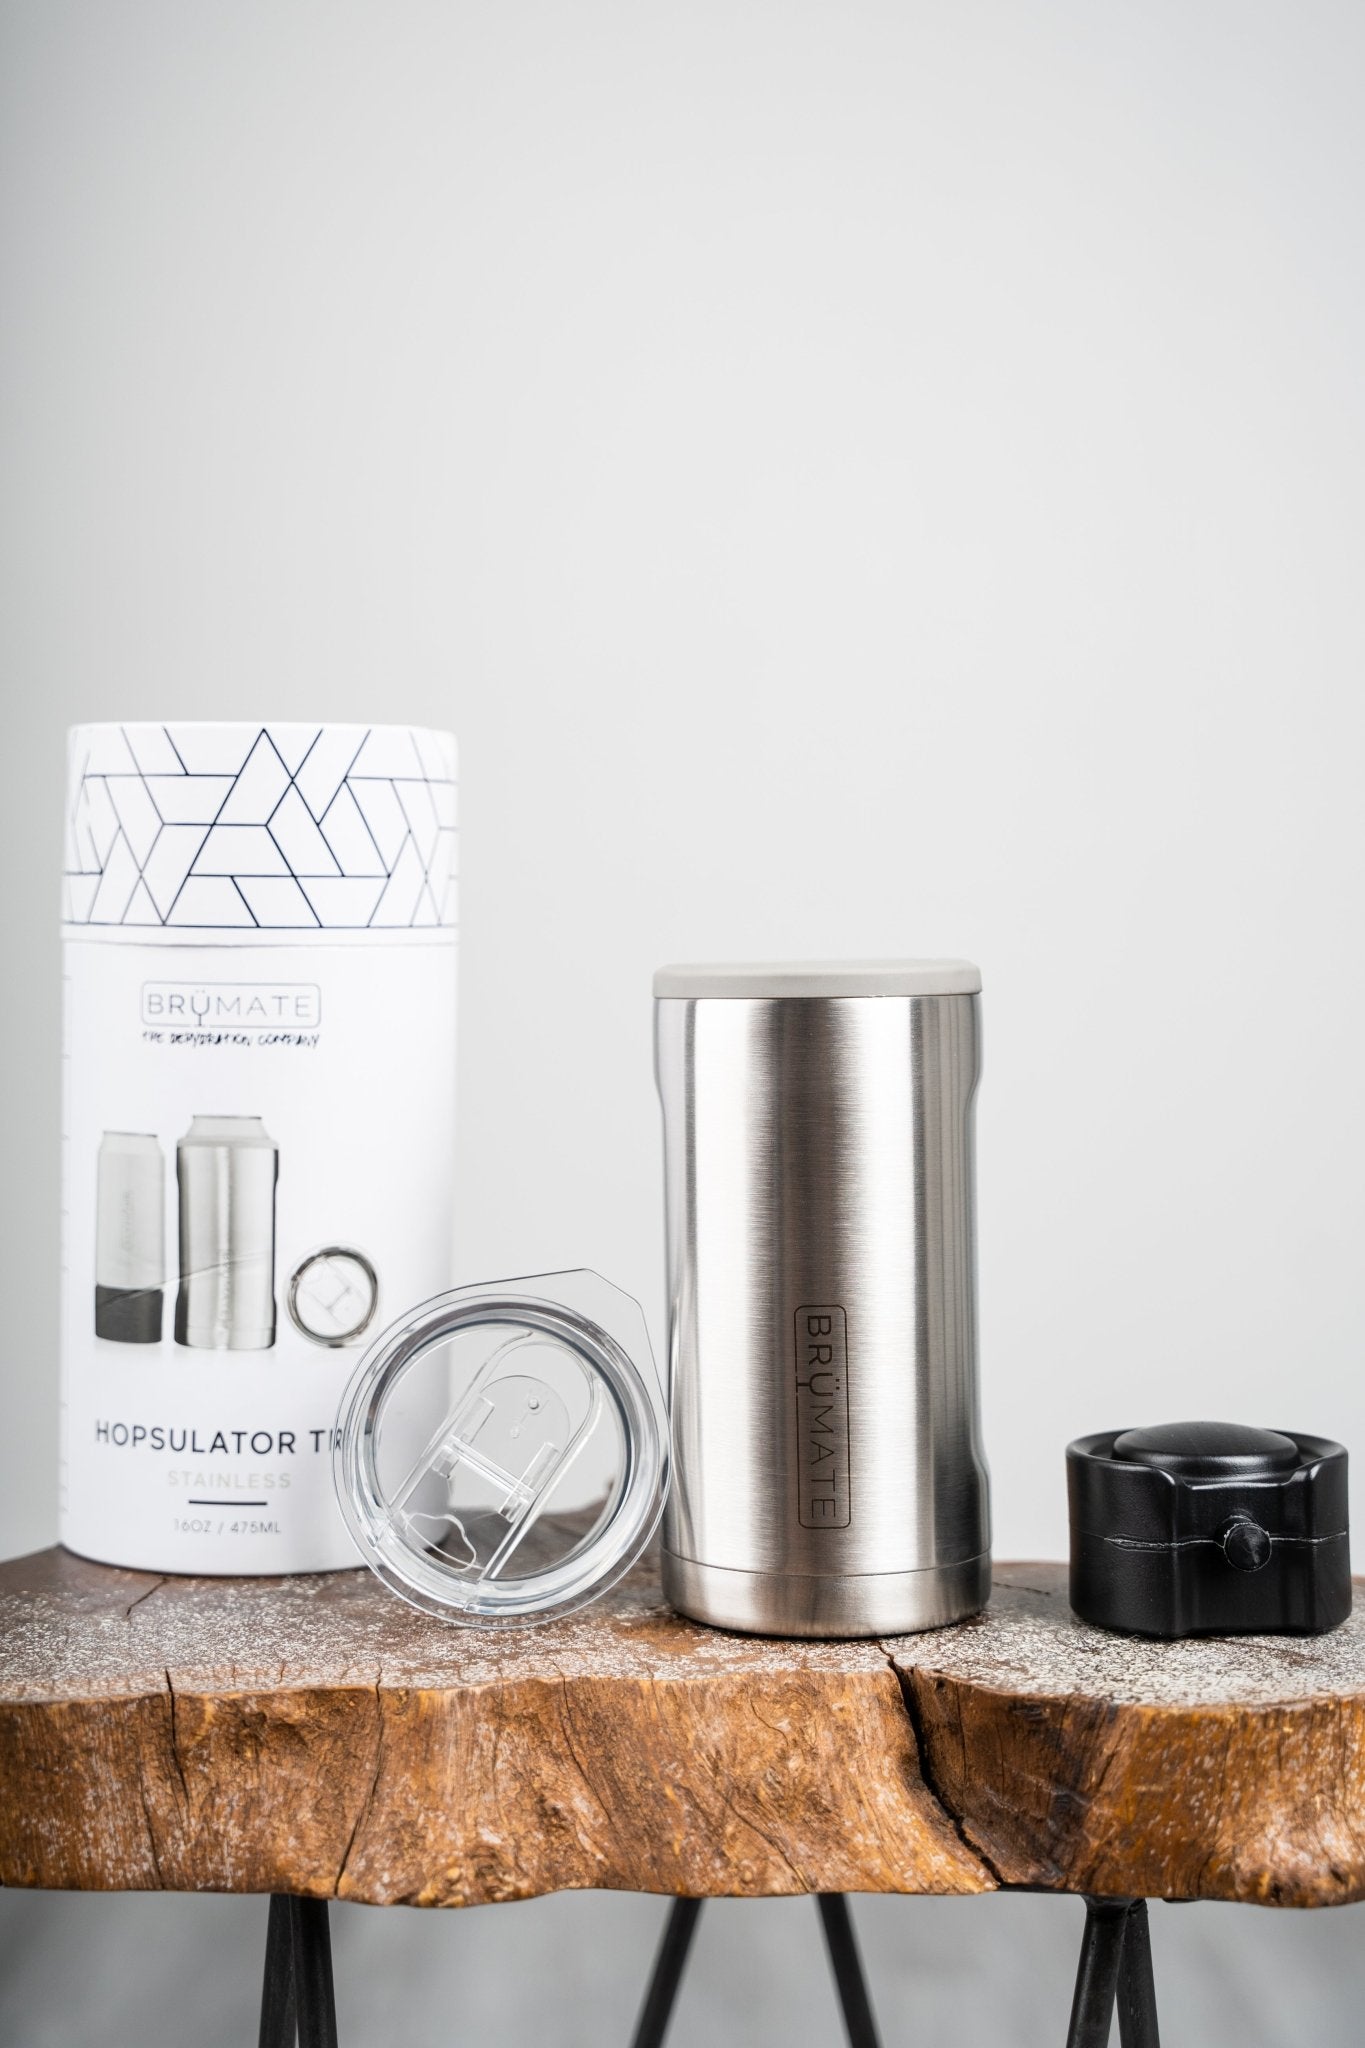 BruMate hopsulator trio 3 in 1 stainless steel - BruMate Drinkware, Tumblers and Insulated Can Coolers at Lush Fashion Lounge Trendy Boutique in Oklahoma City